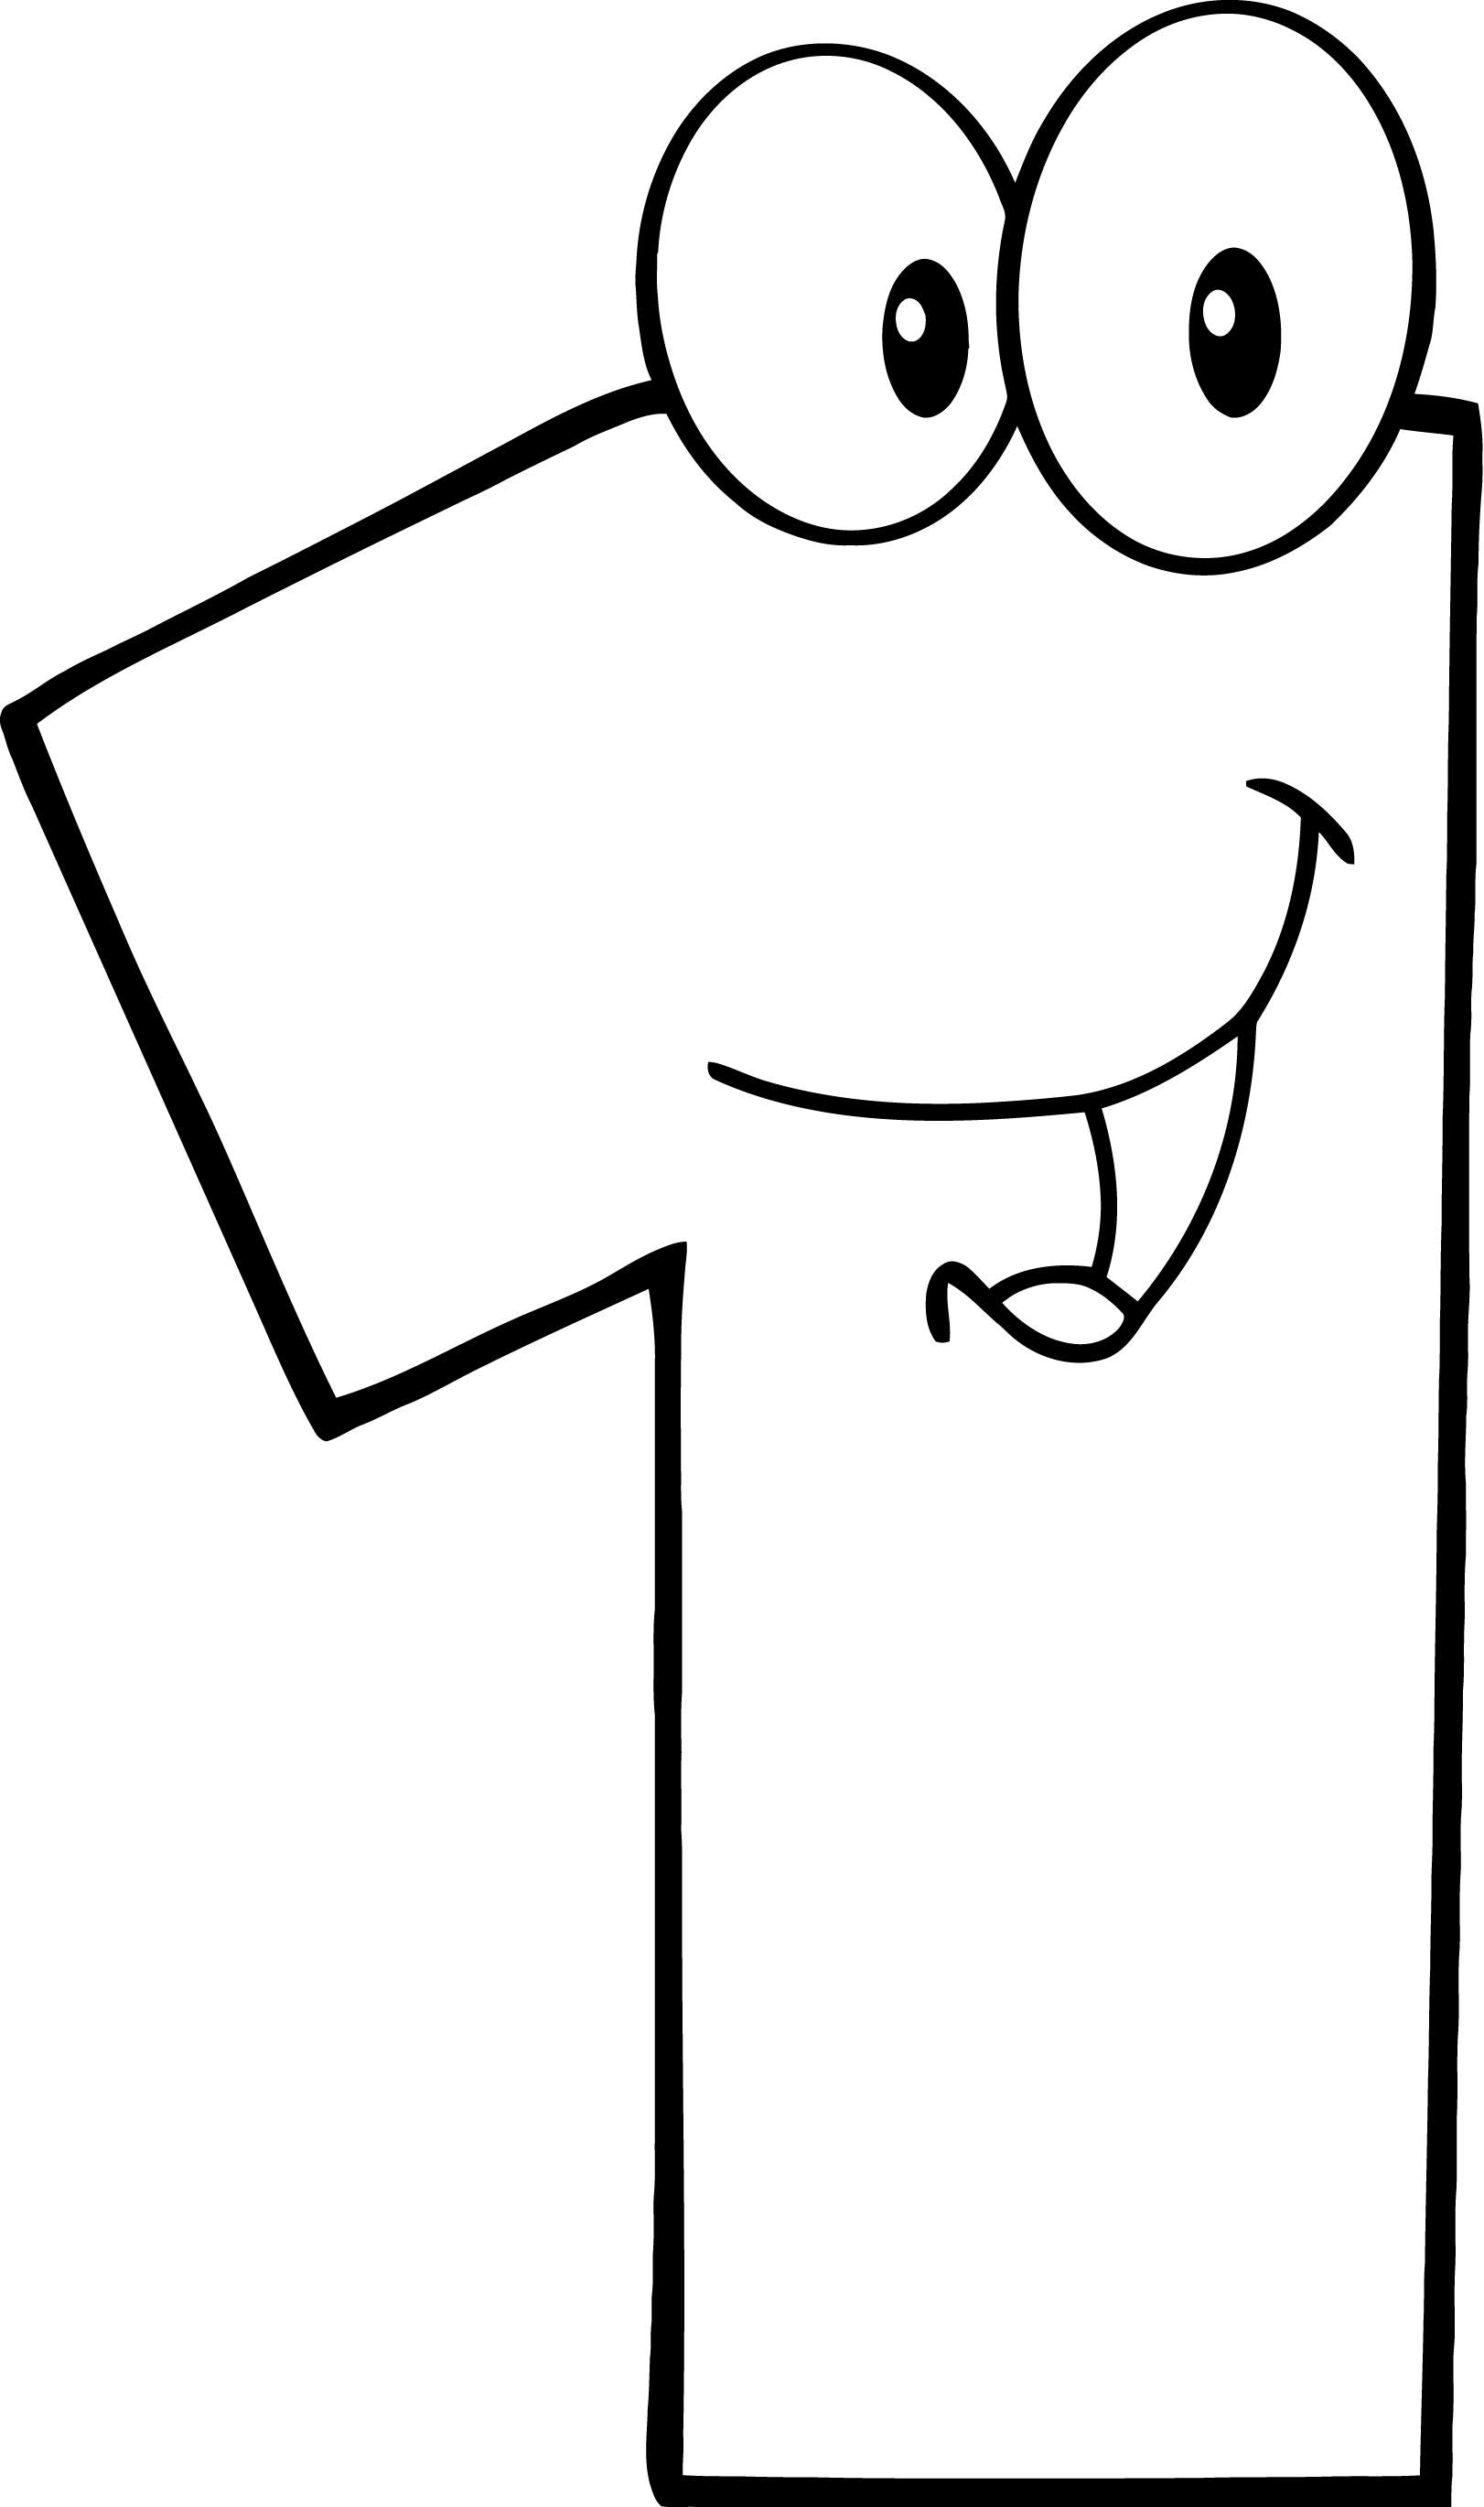 Number 8 character clipart black and white